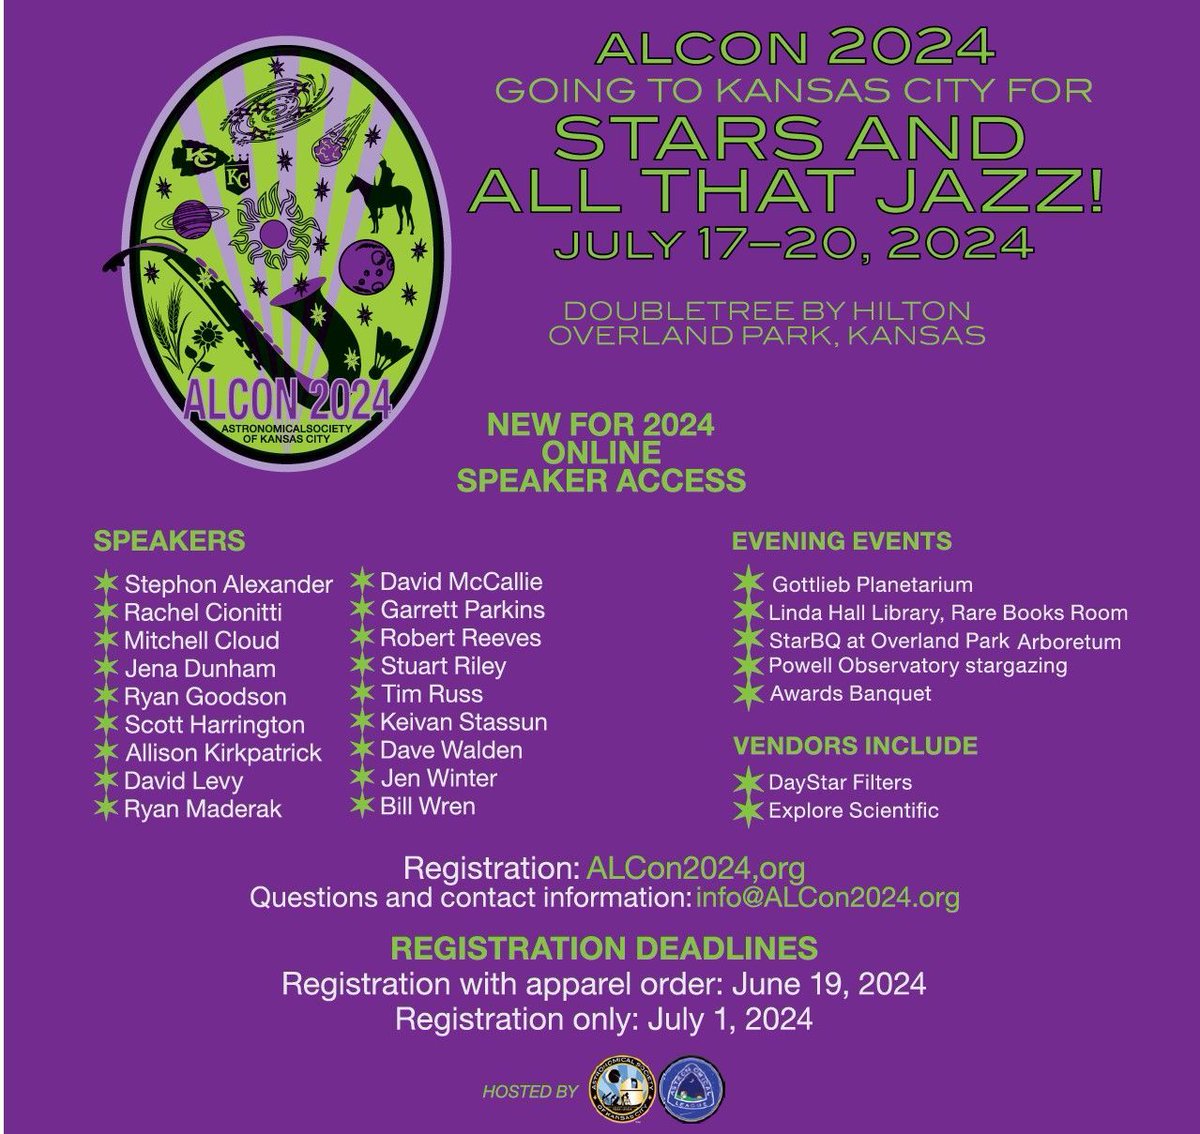 In honor of the Astronomical Society of Kansas City’s 100th anniversary, they would like to invite everyone to join them at ALCon 2024, Stars and All That Jazz!, this July in Kansas City! buff.ly/4bqcxEU